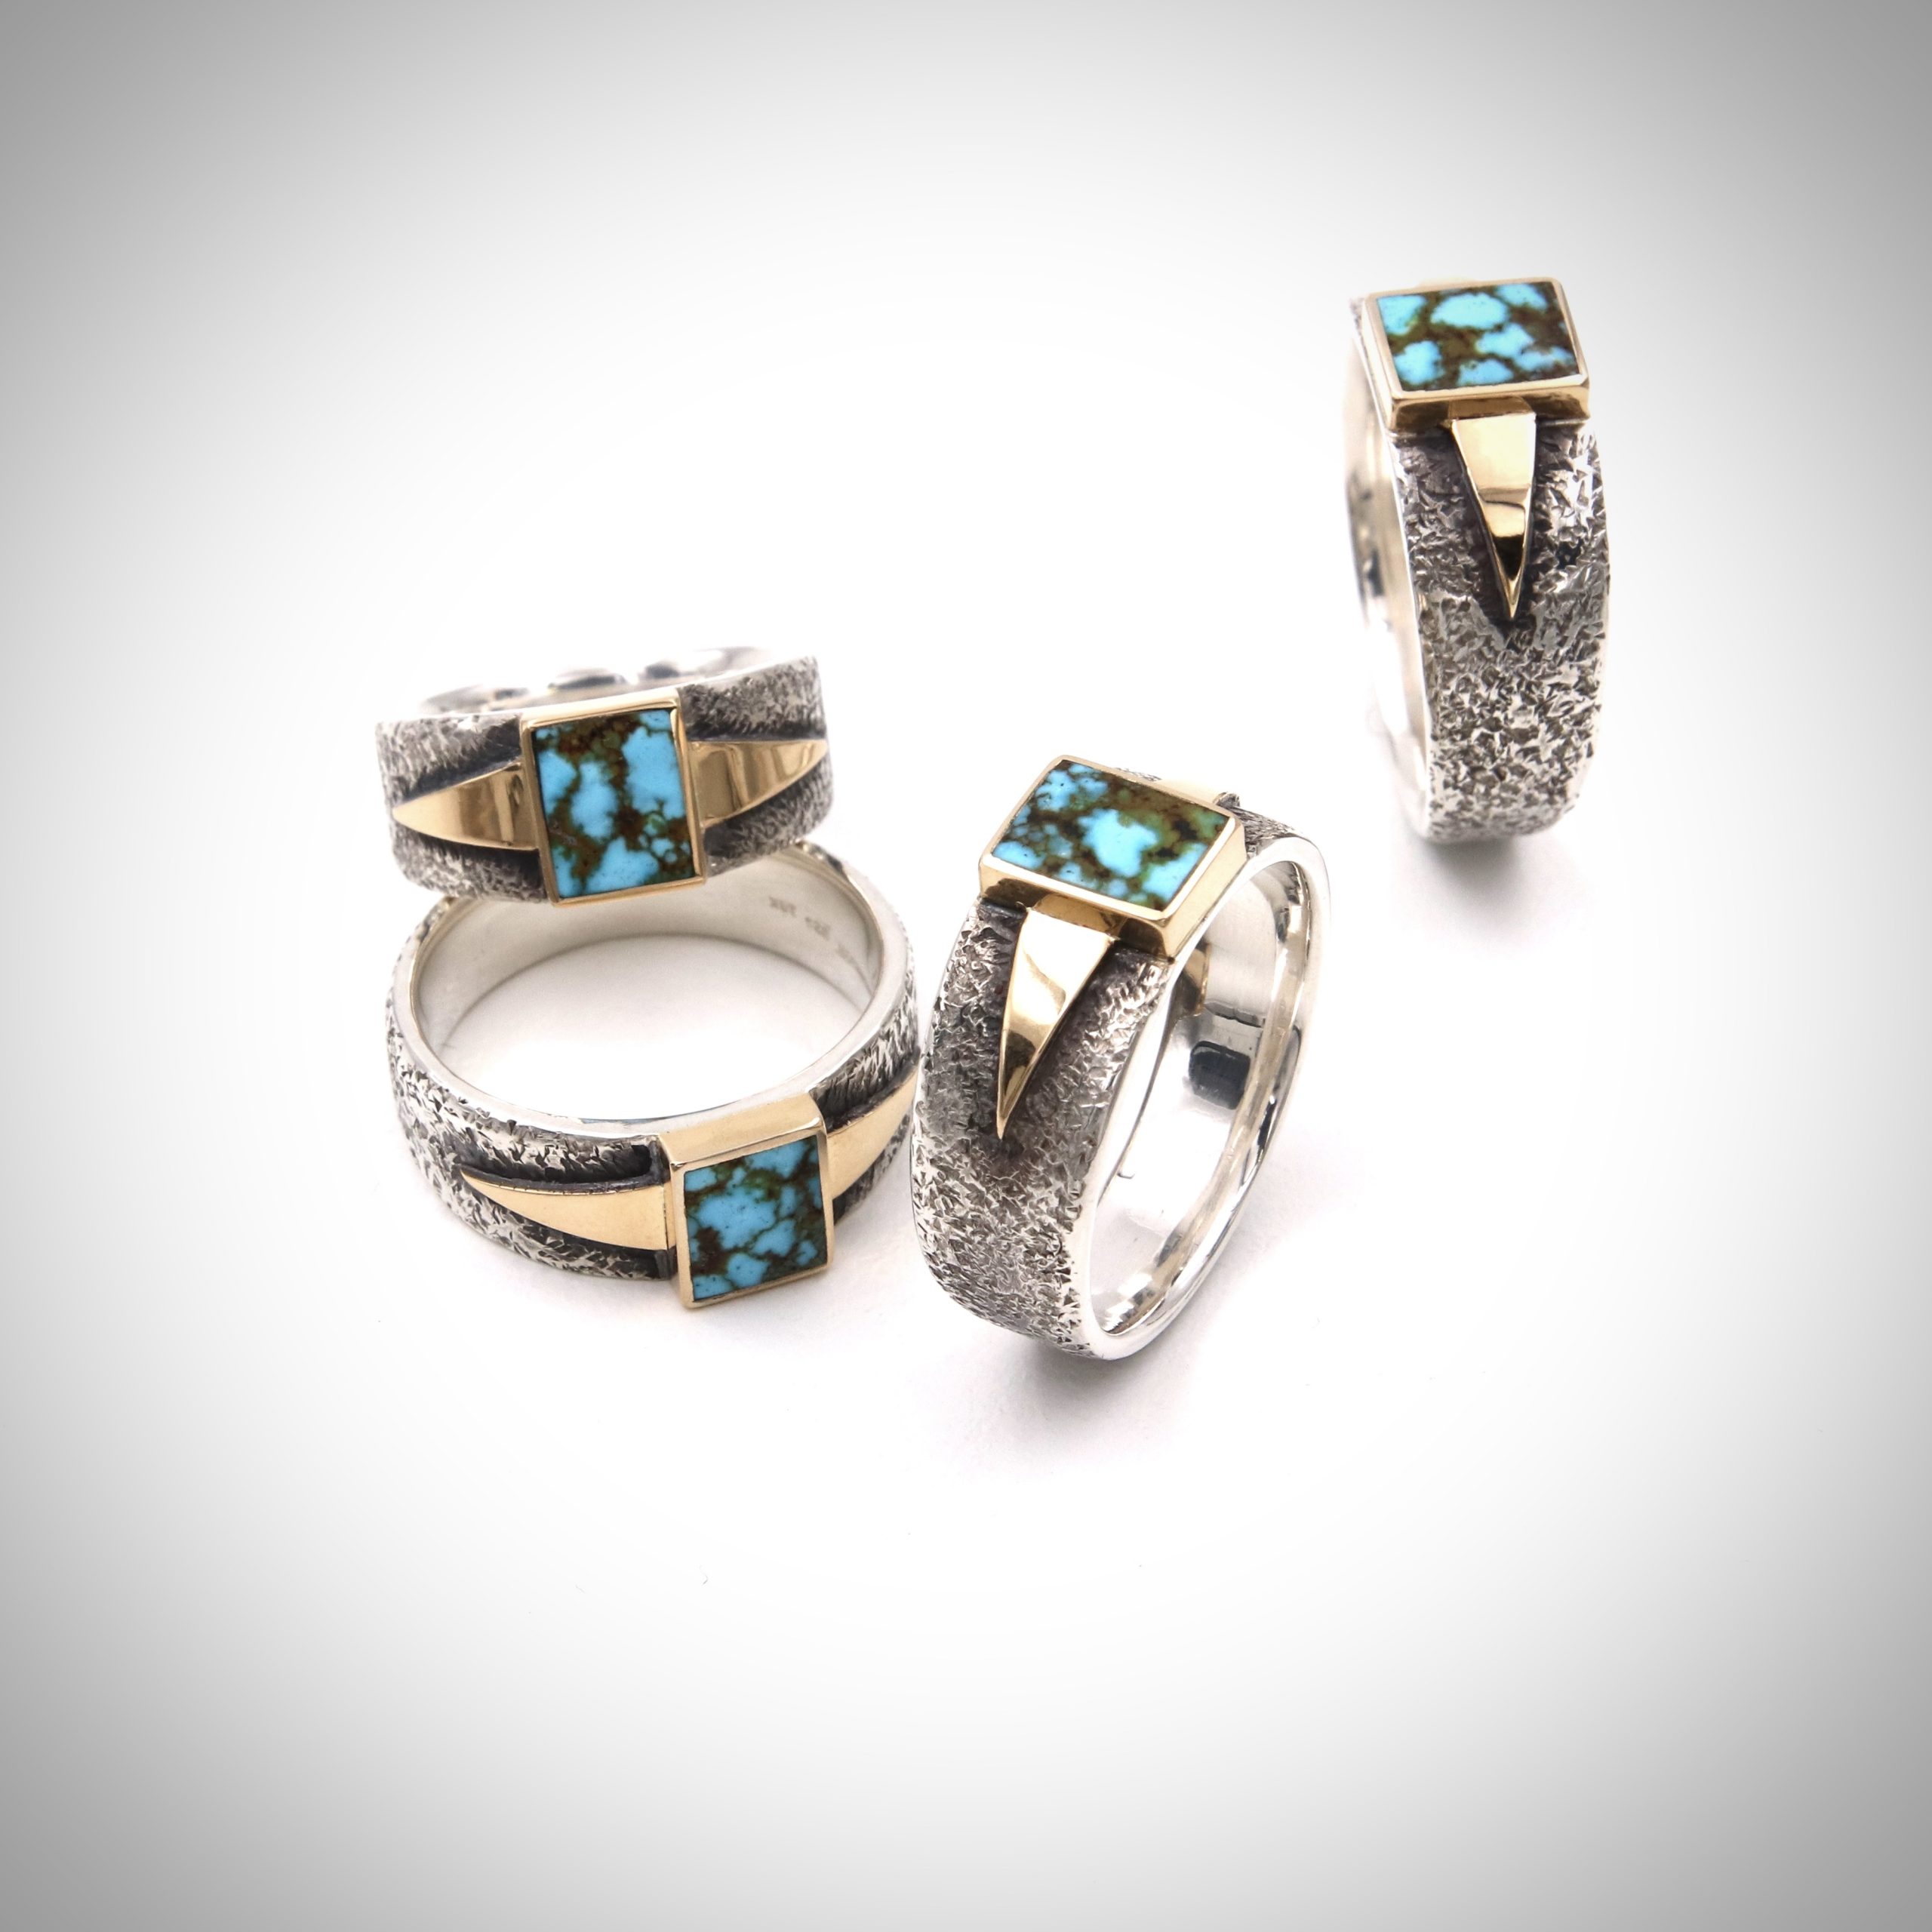 Turquoise and Gold rings